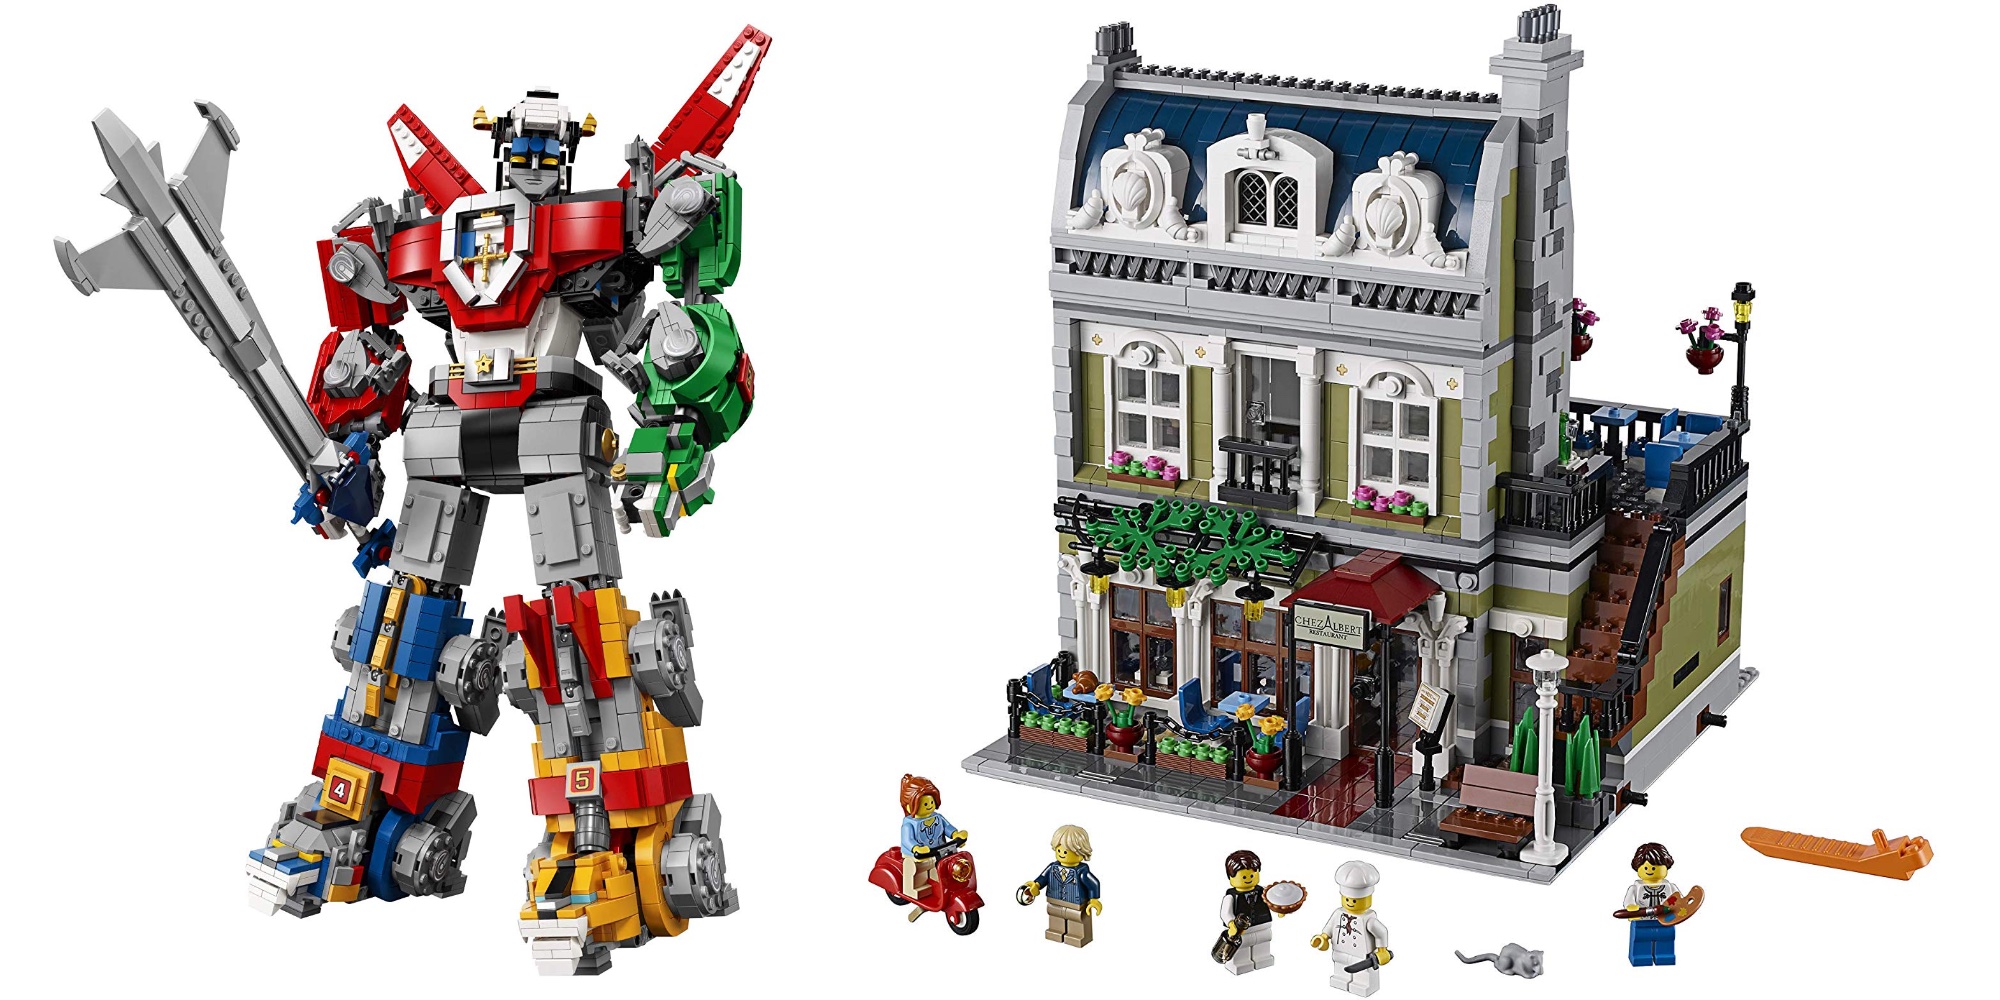 LEGO Cyber Monday sale 30 off kits, freebies, and more 9to5Toys